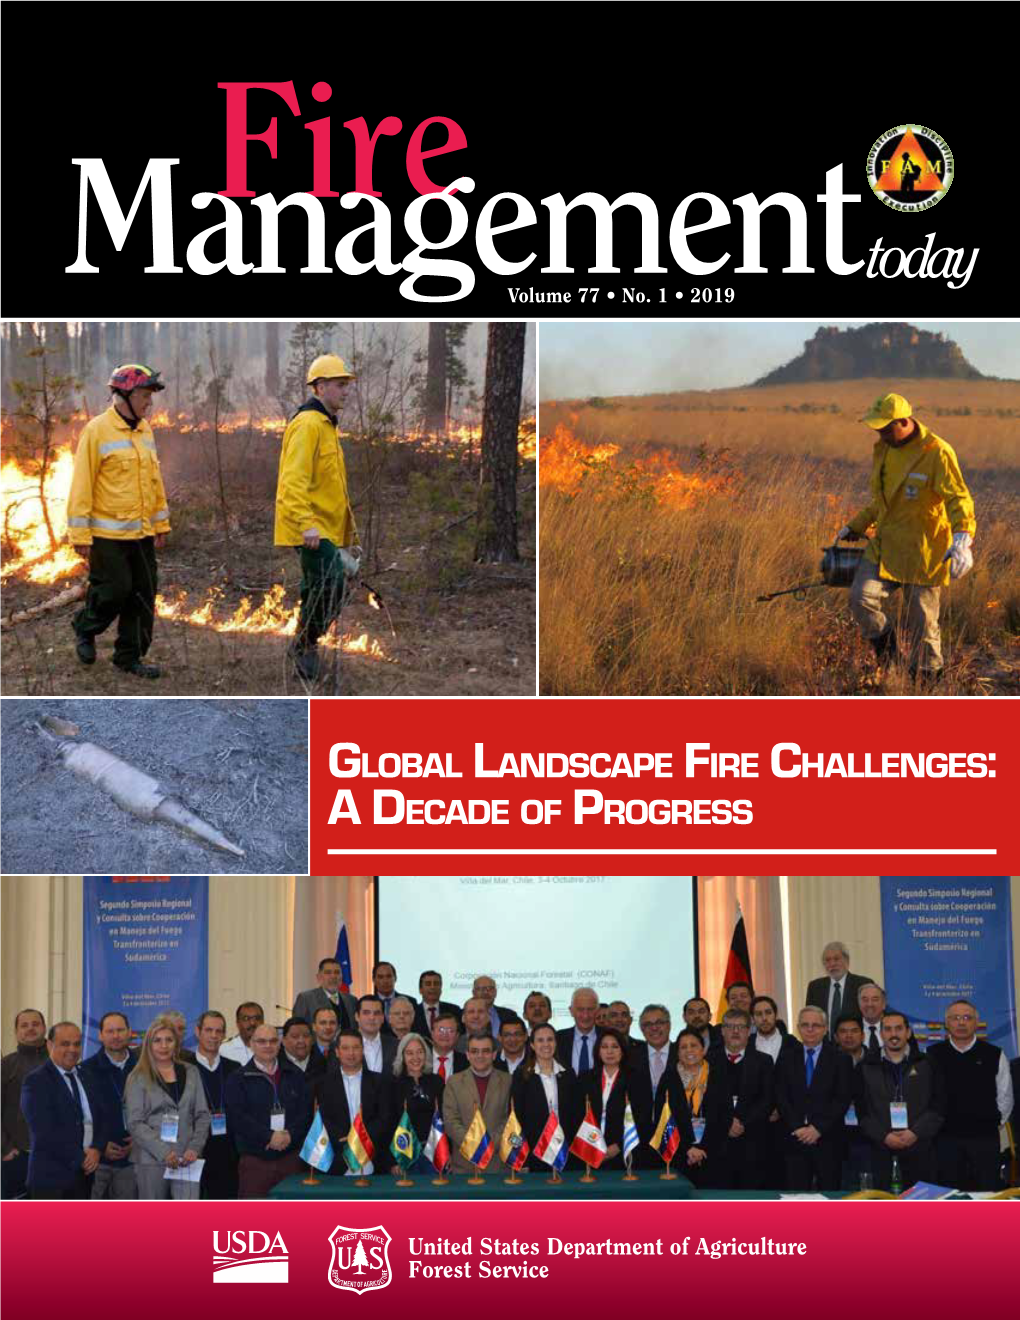 Fire Management Today Contains Articles About Issues Pertaining to Wildland Fre Management Around the World